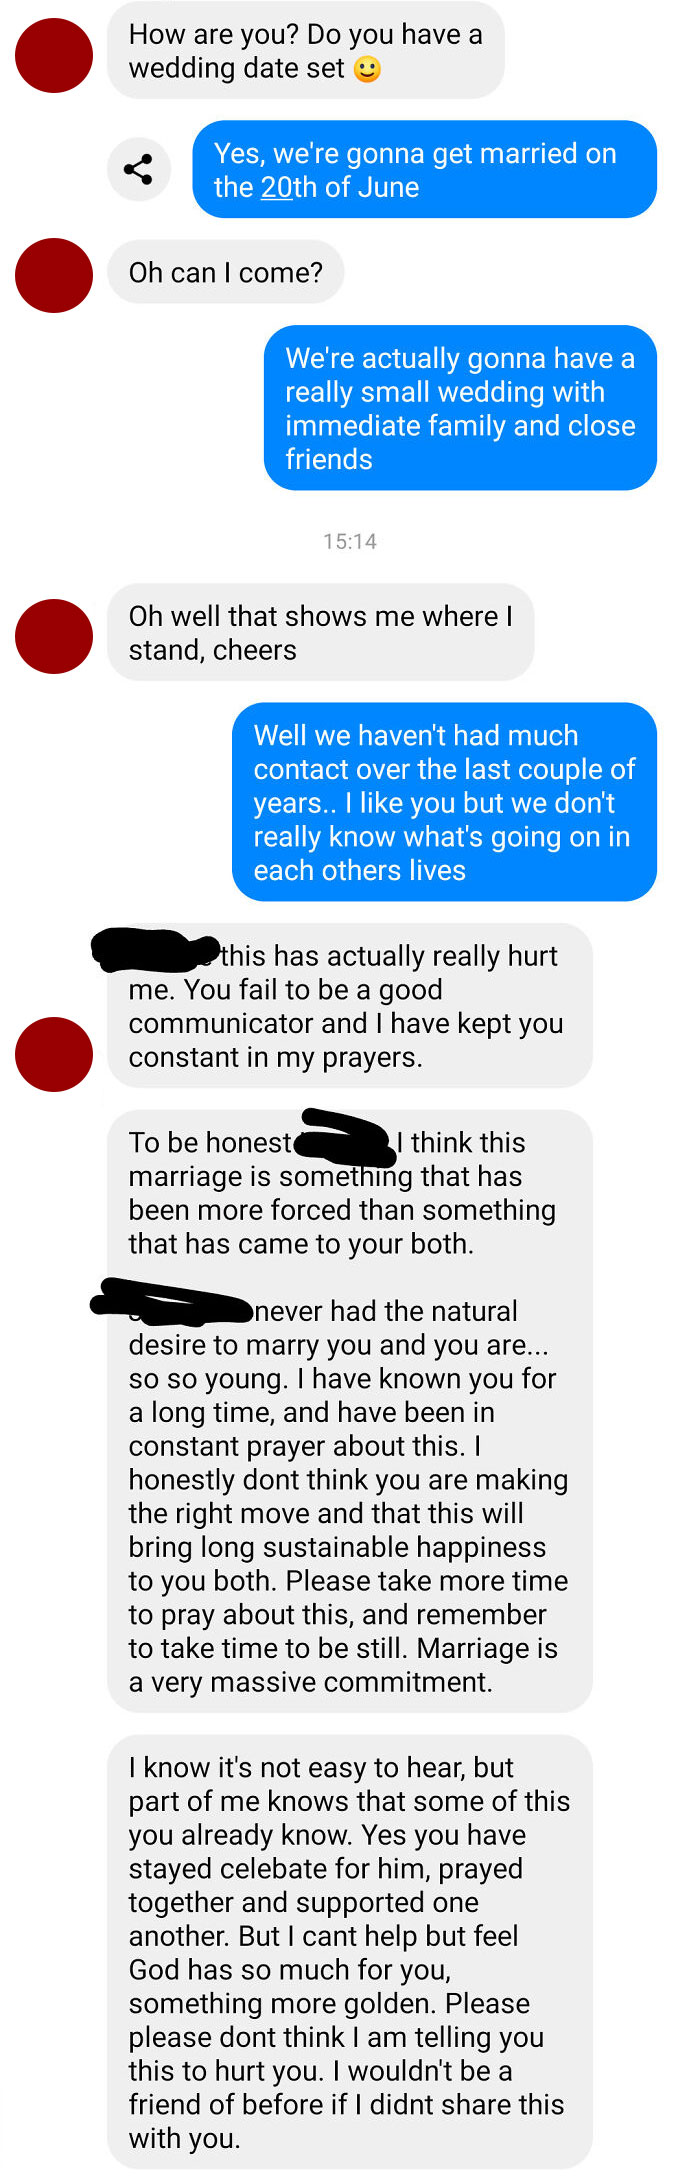 Girl I Rarely Speak To Anymore Asks If She's Invited To Our Wedding. After Telling Her That She Isn't She Tells Me I Should Rethink Marrying My Fiancé